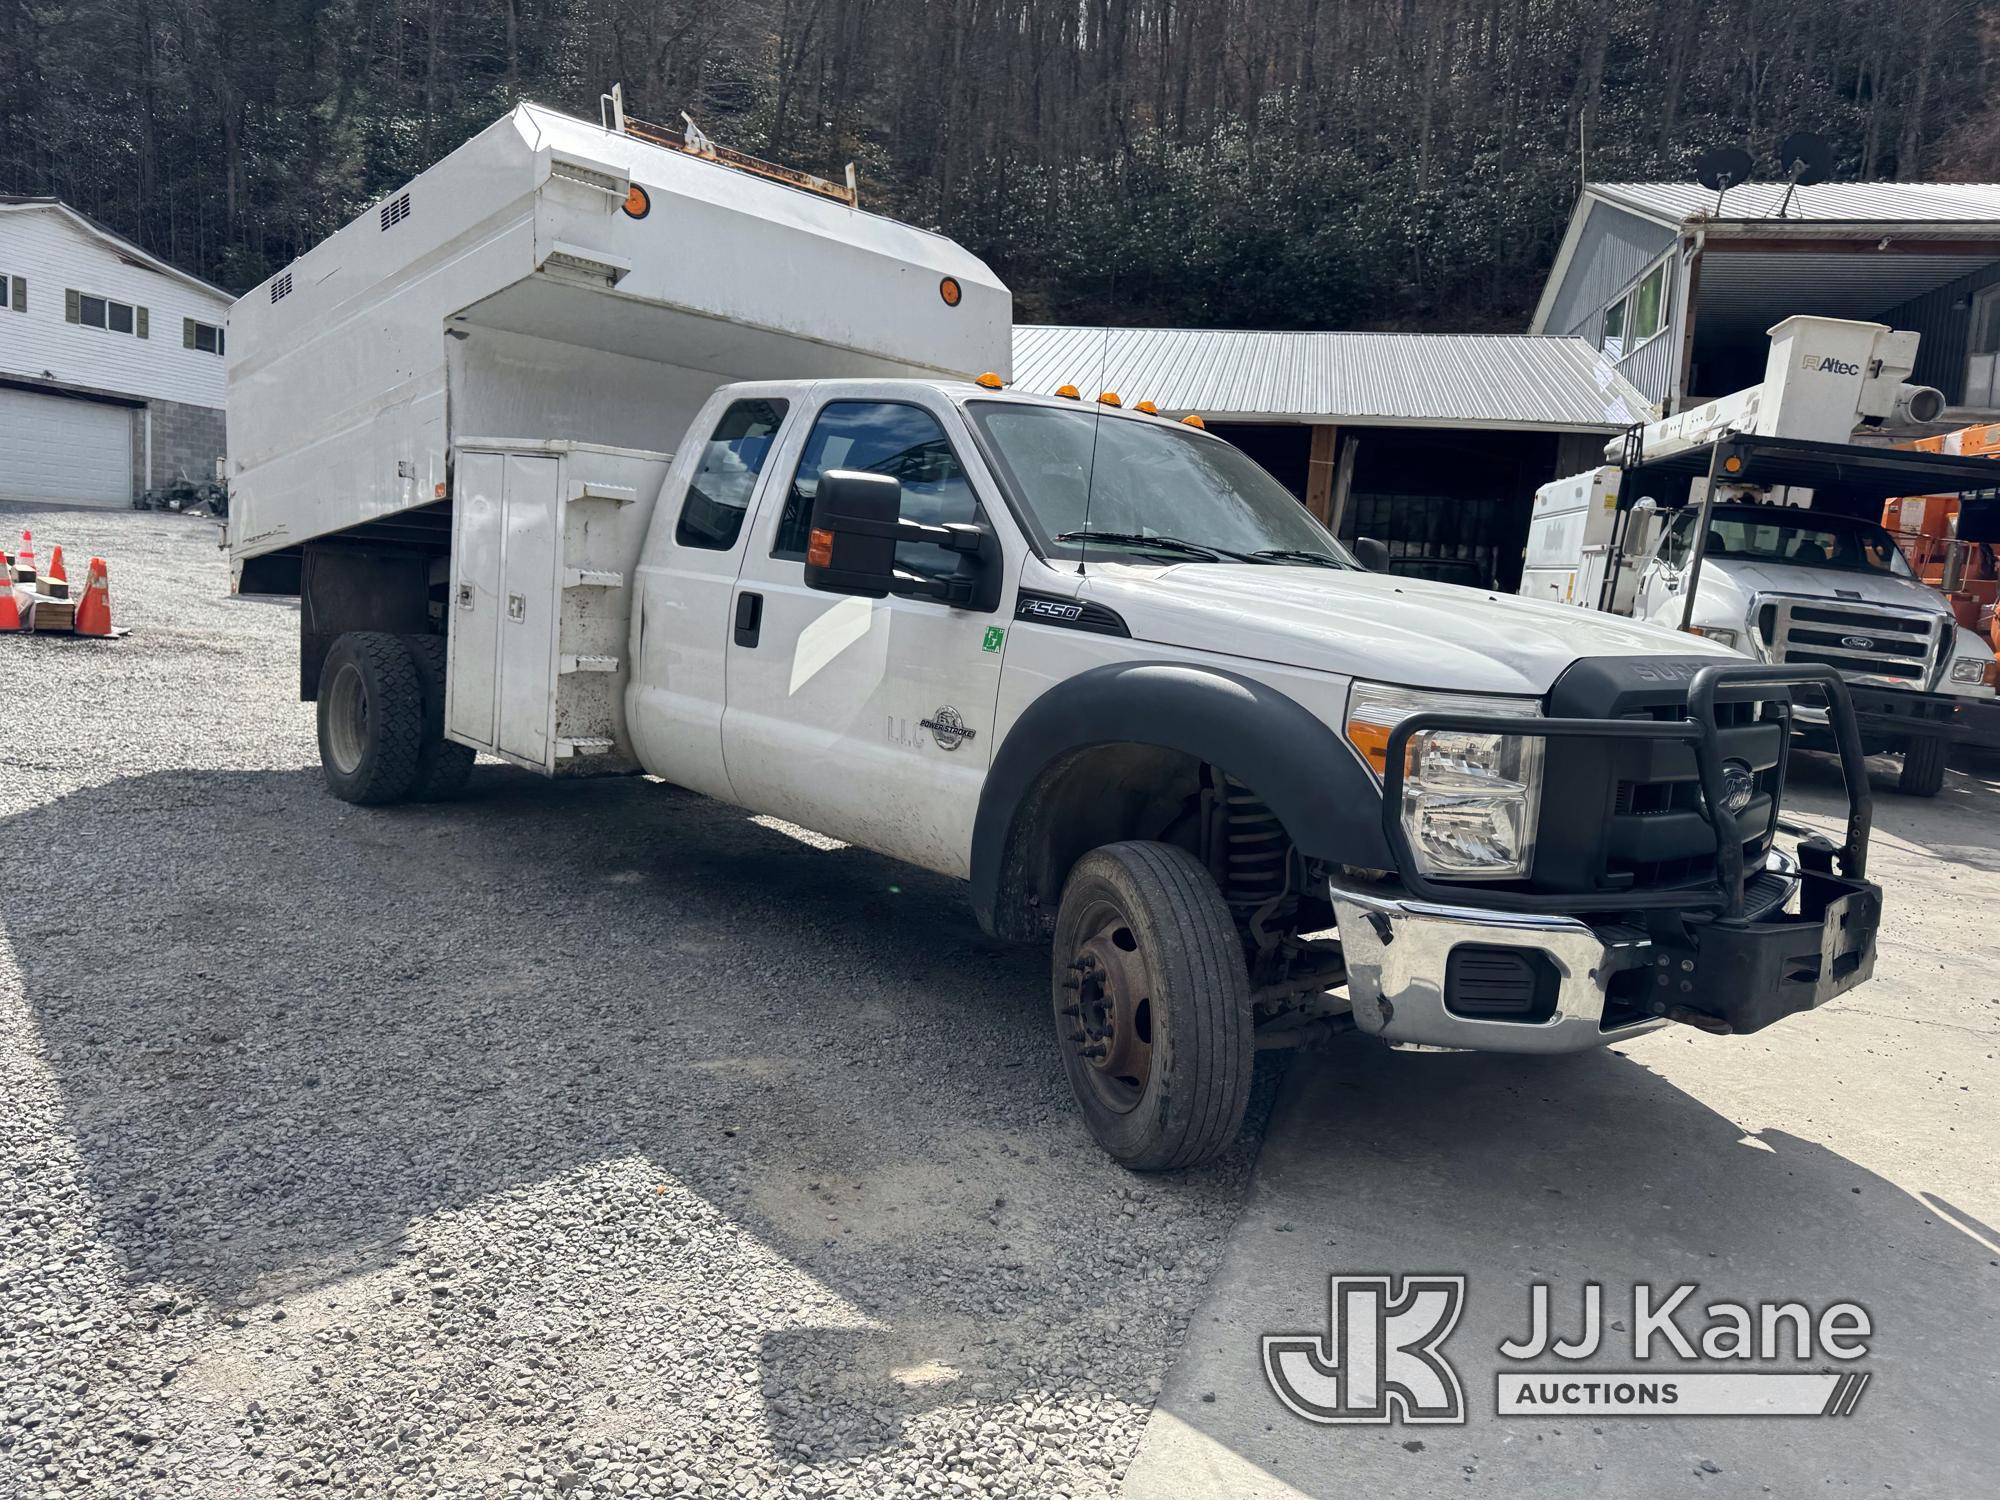 (Hanover, WV) 2016 Ford F550 4x4 Extended-Cab Chipper Dump Truck Runs, Moves & Dump Operates) (Low P